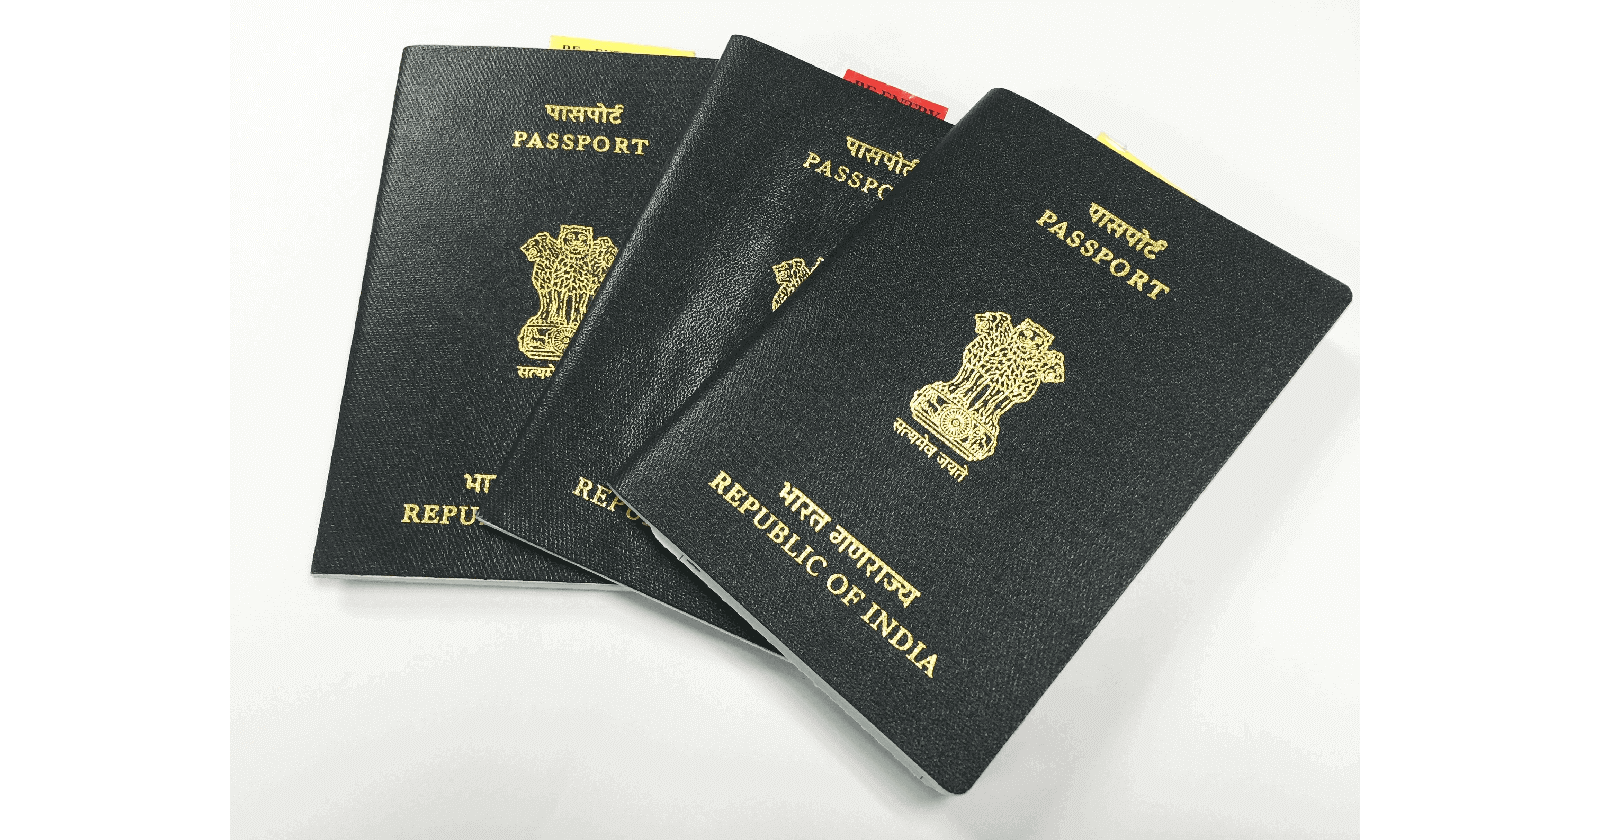 name change travel with old passport